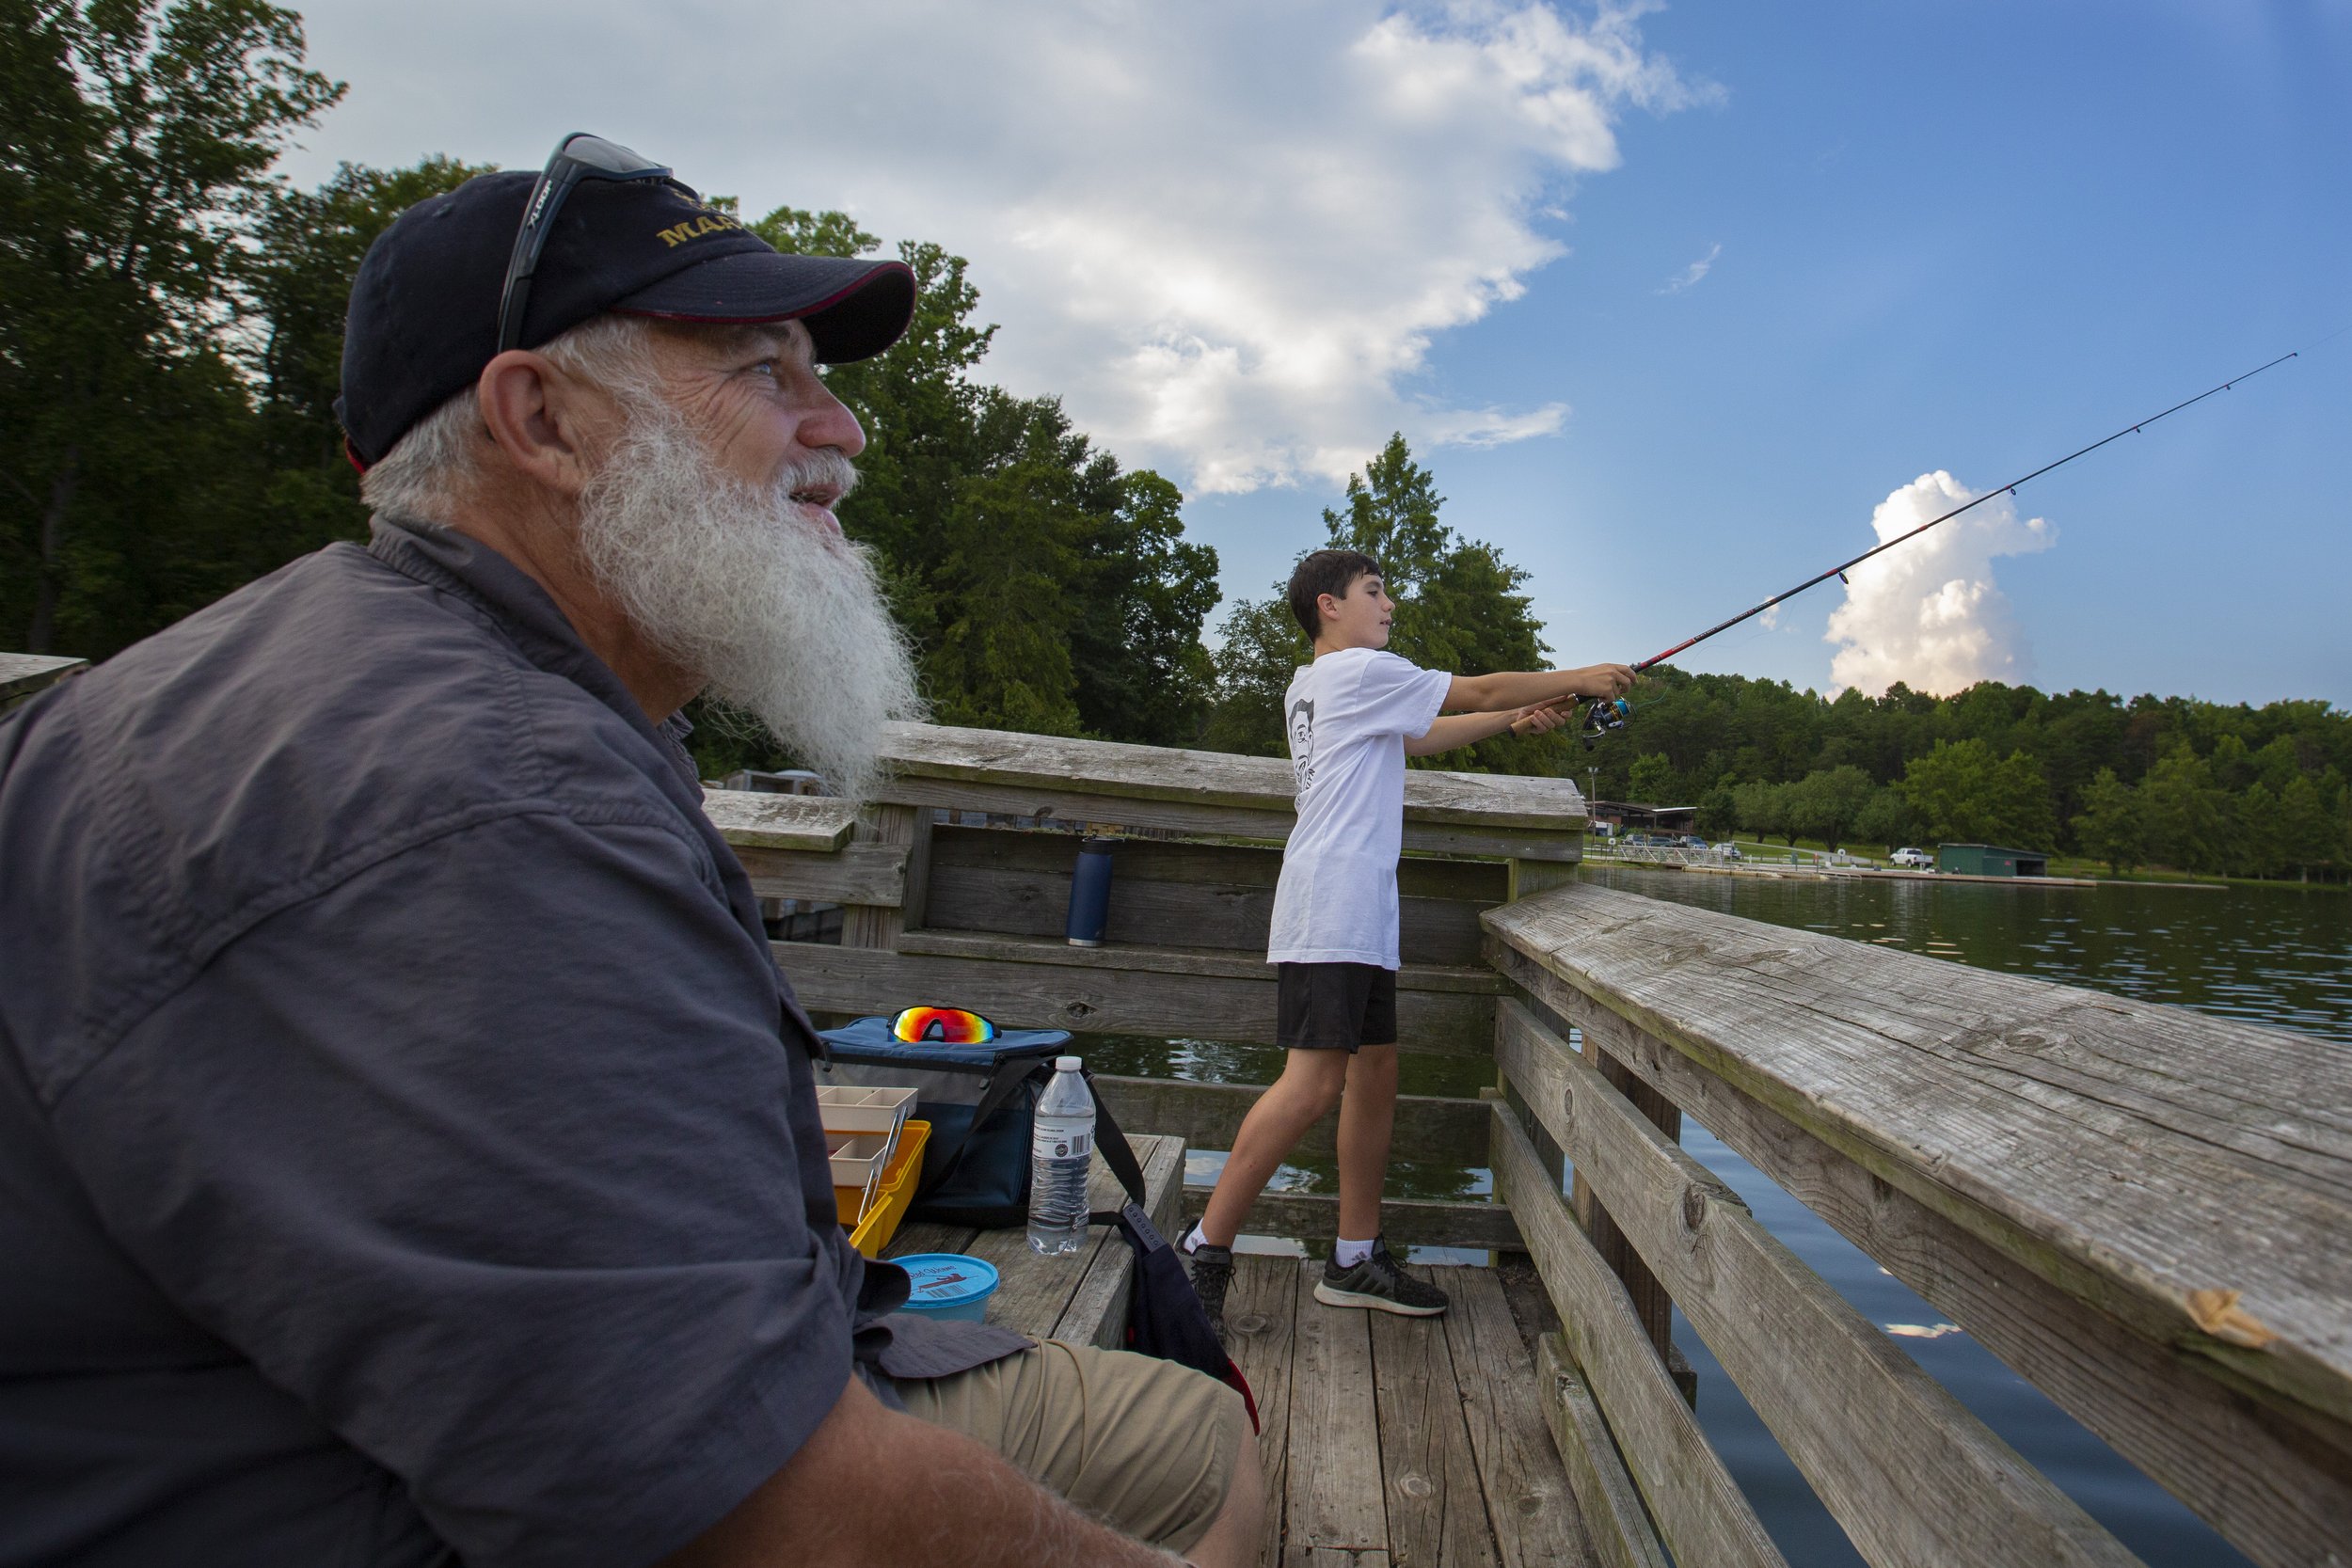  Chrystian Cross casts his rod while fishing with his grandfather, Dan Cross, before sunset at Lake Higgins in Greensboro, N.C., on Wednesday, August 25, 2021.  